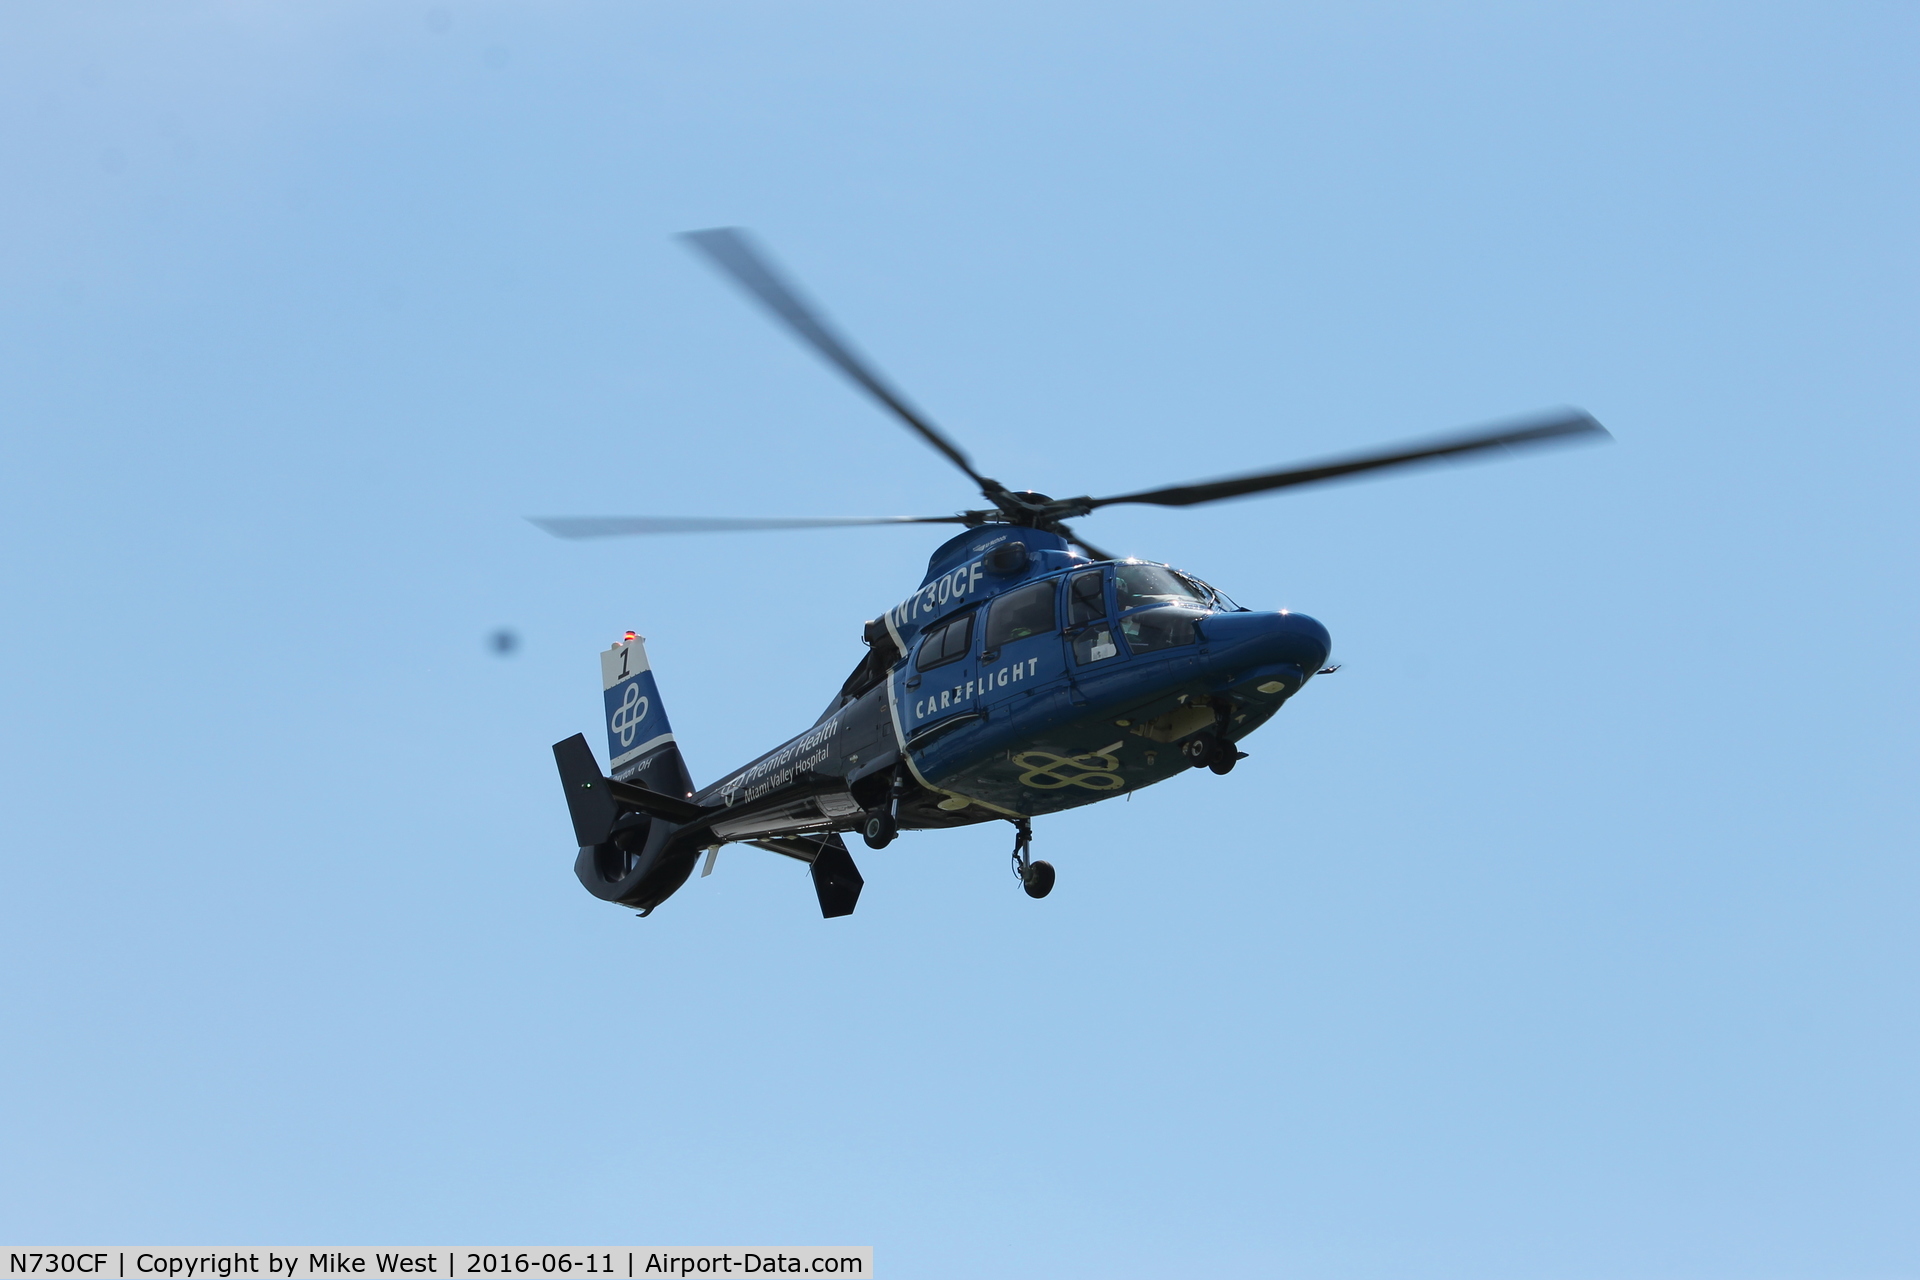 N730CF, 2013 Eurocopter AS-365N-3 Dauphin 2 C/N 6967, Taking off from Tipp-City, Ohio from a community safety event.